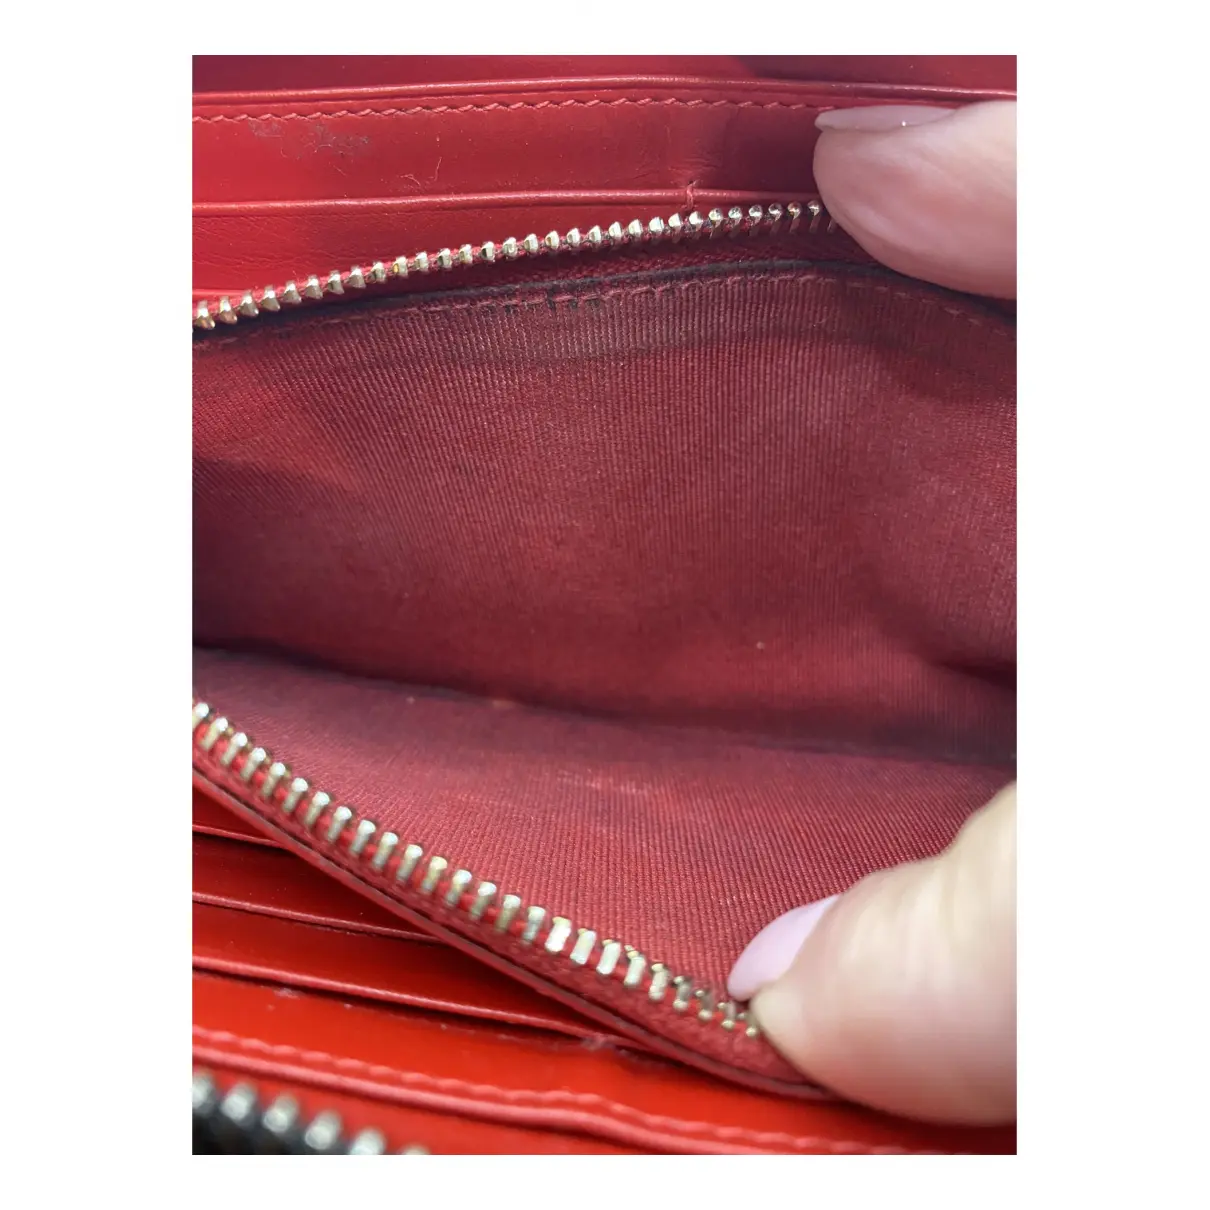 Buy Christian Louboutin Patent leather wallet online